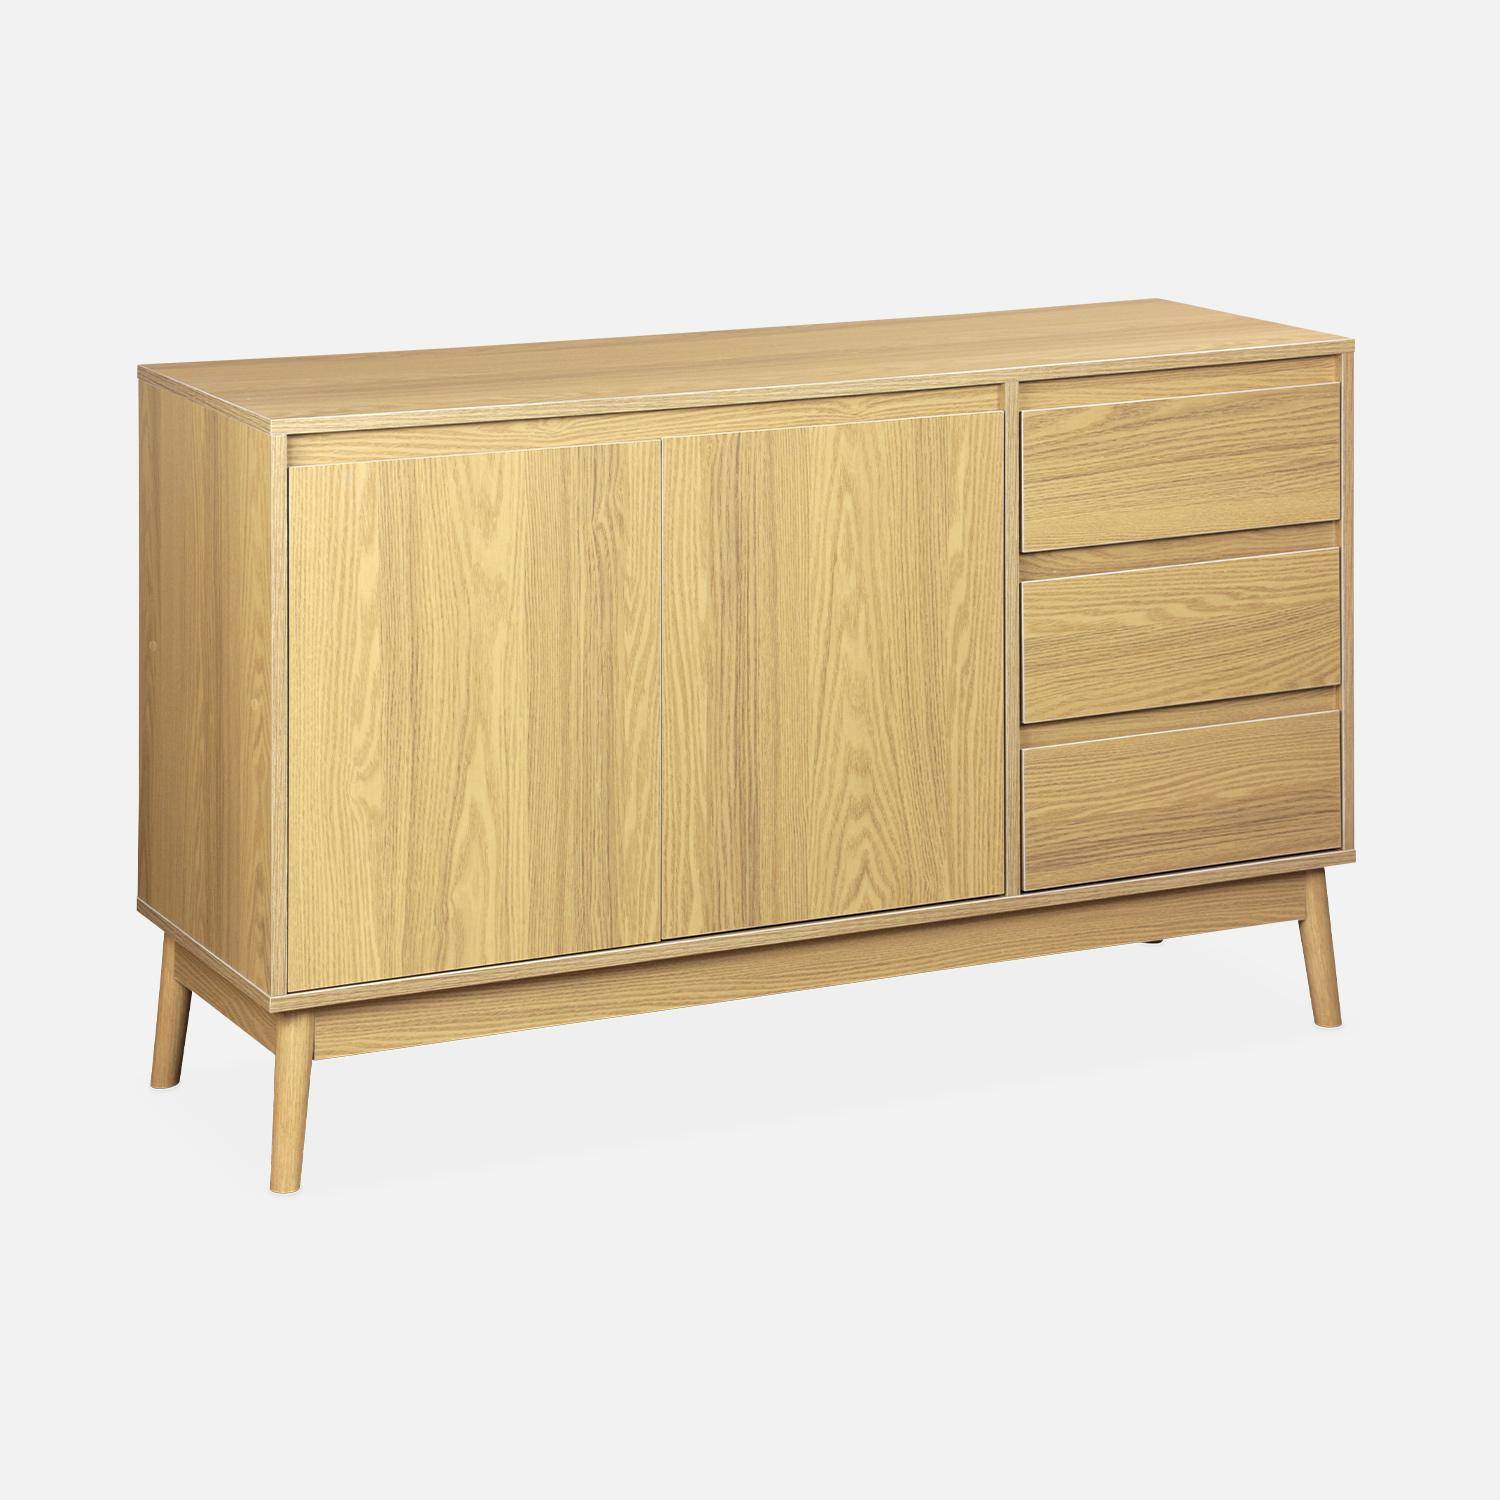 Wooden sideboard with 2 doors and 3 drawers L 120 x W 39 H 76cm - Dune Photo3